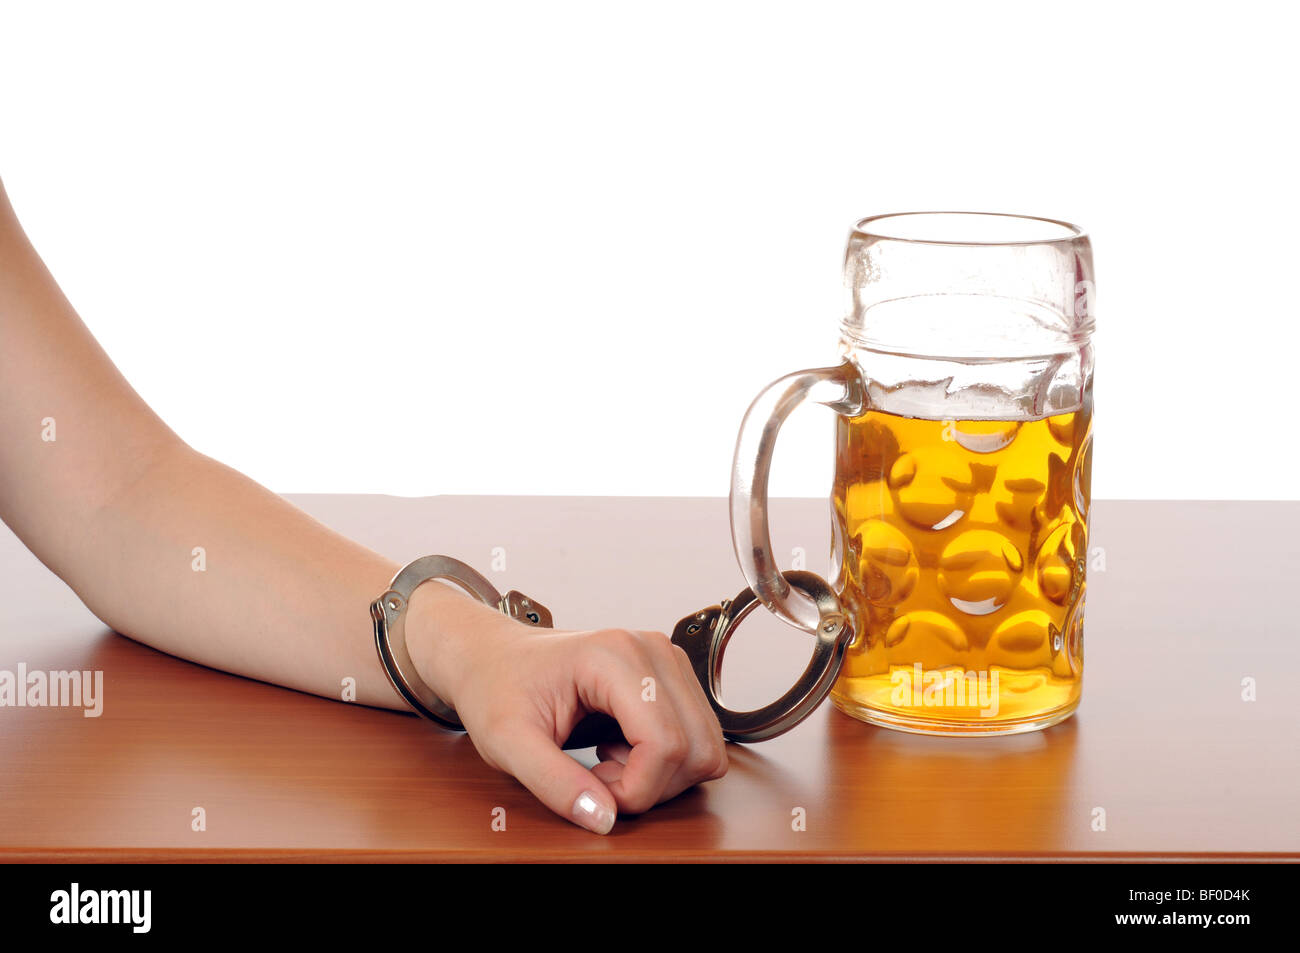 Glass of beer with handcuffs as symbol for alcohol abuse Stock Photo